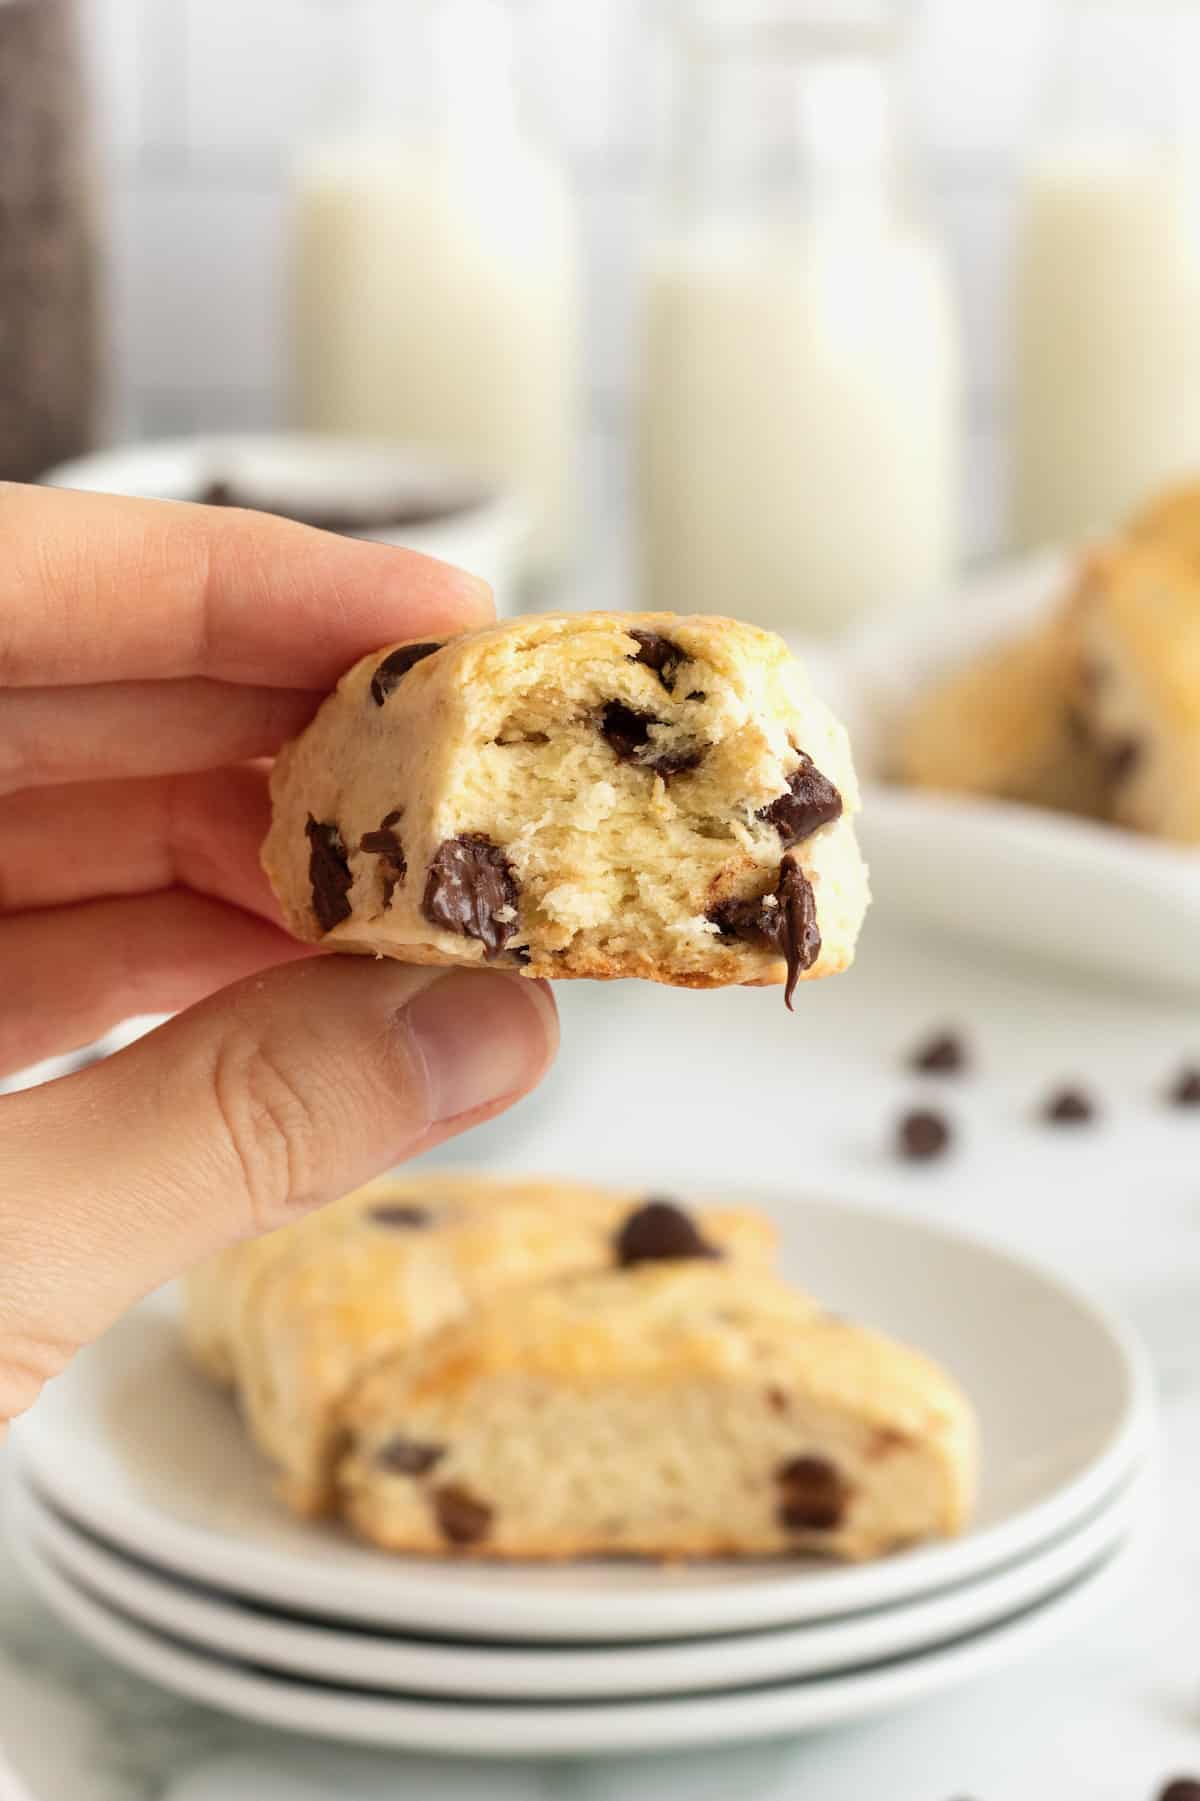 Chocolate Chip Scones by The BakerMama